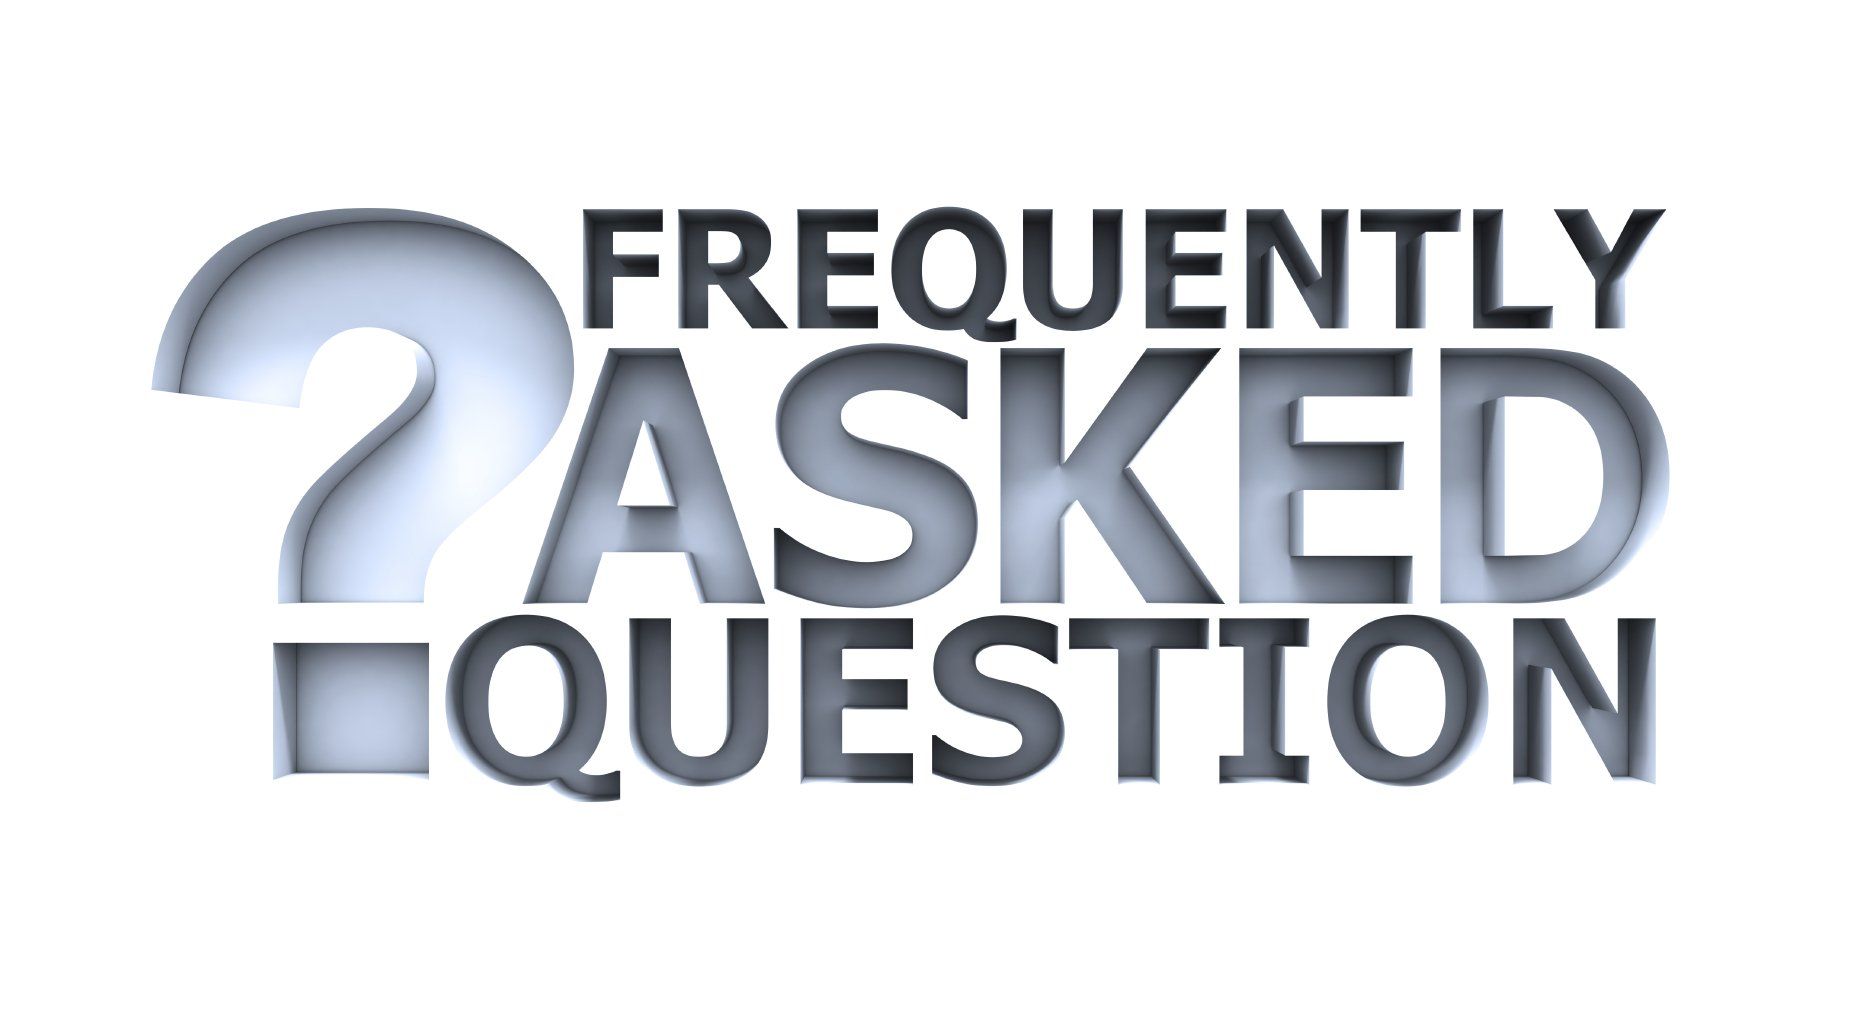 Frequently asked question graphic